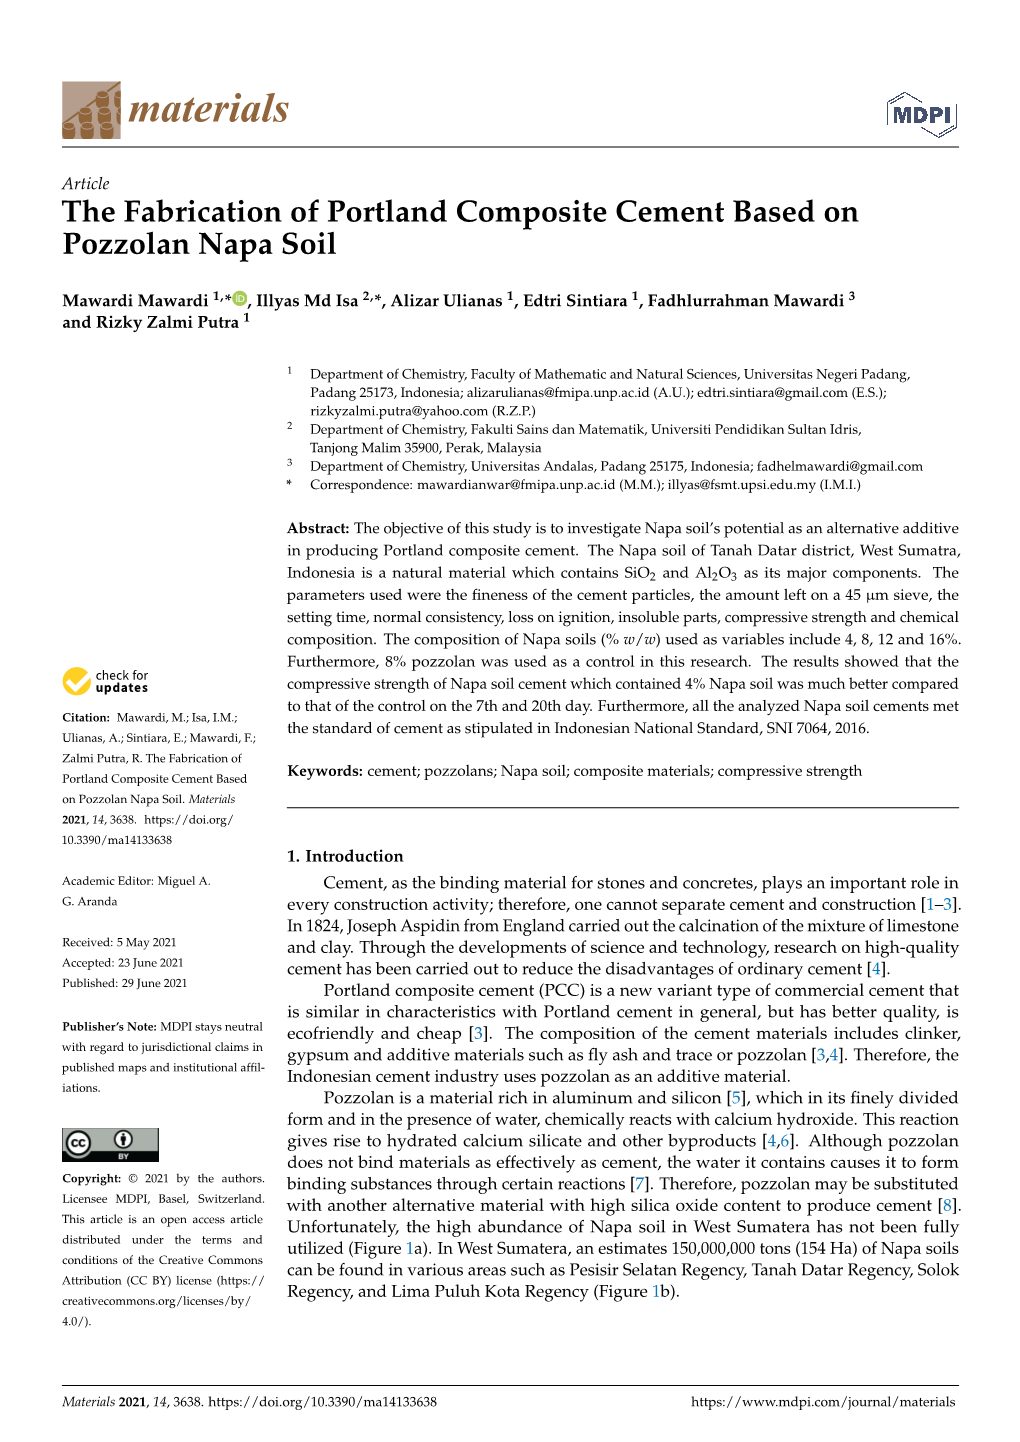 The Fabrication of Portland Composite Cement Based on Pozzolan Napa Soil